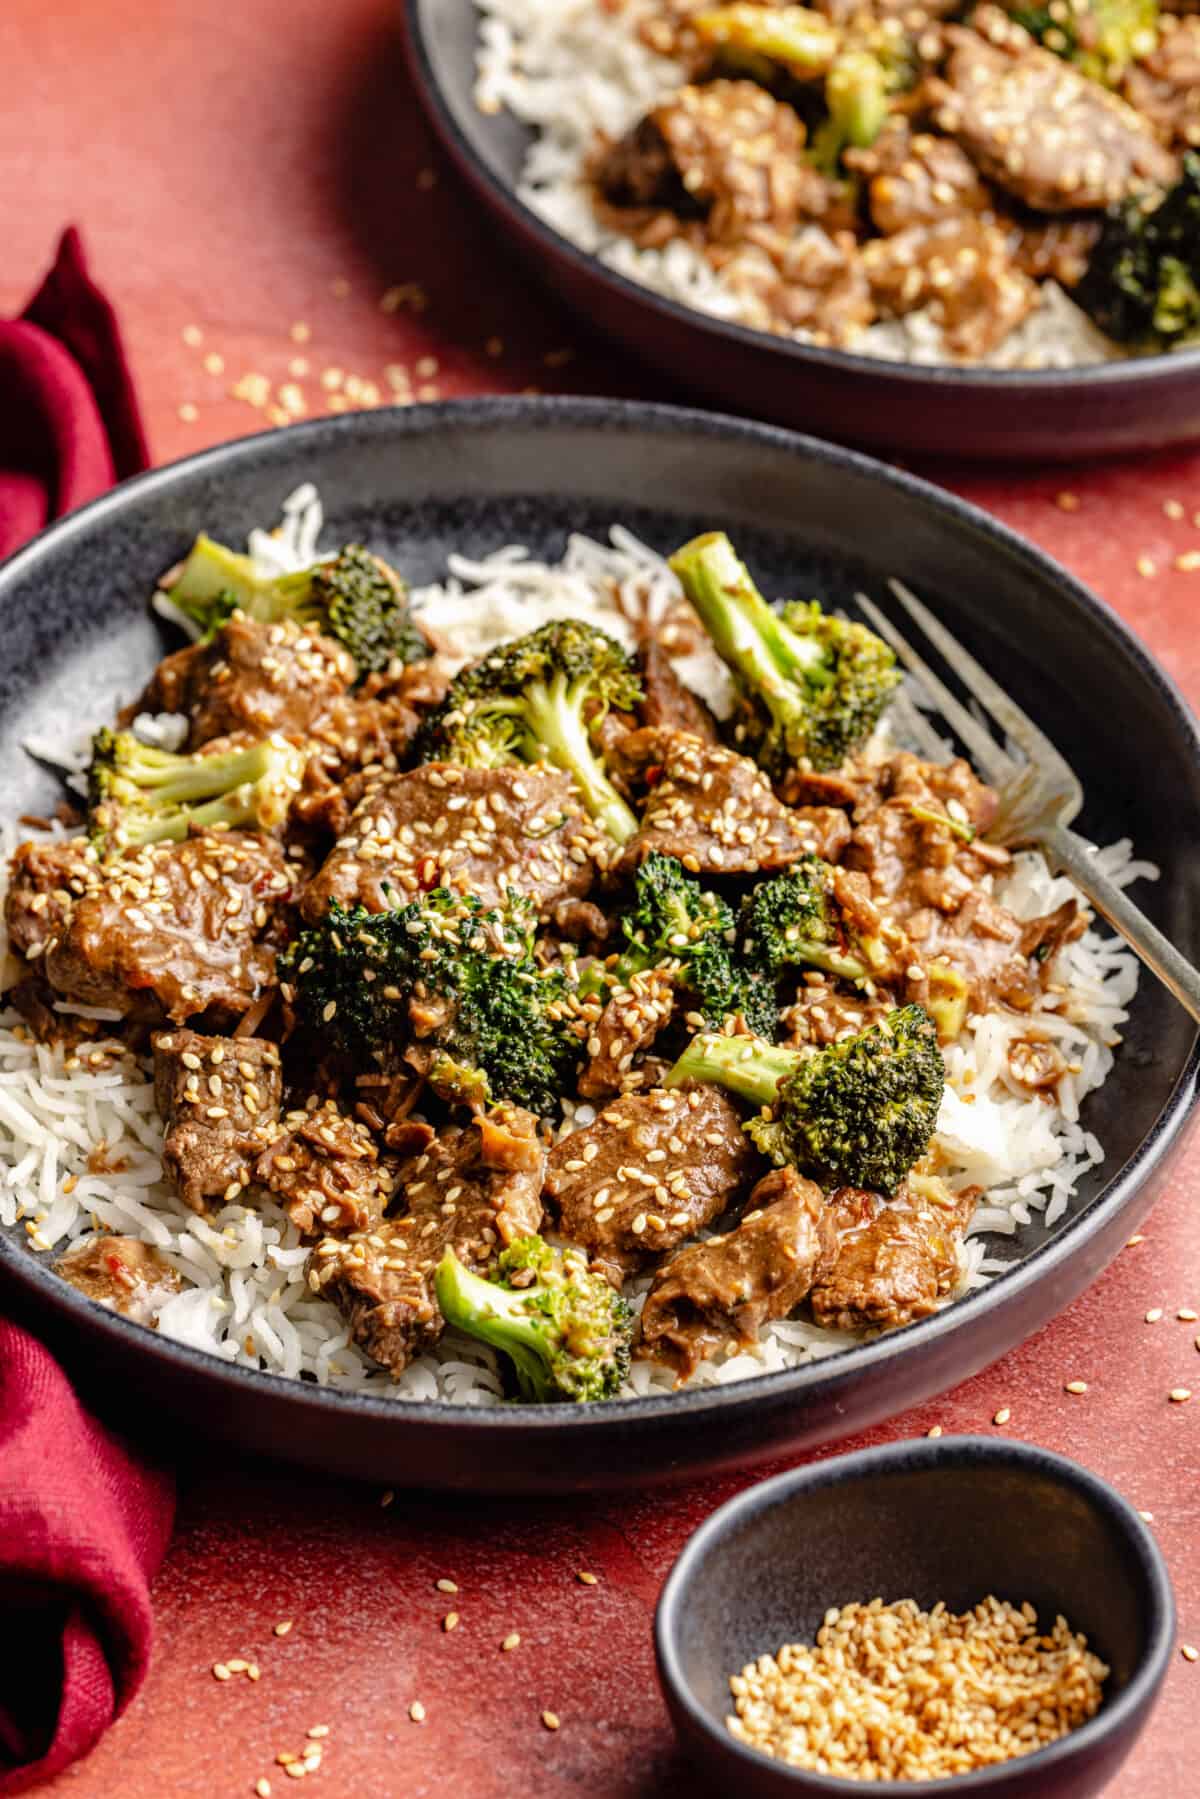 Slow Cooker Beef and Broccoli in bowls on red backdrop.